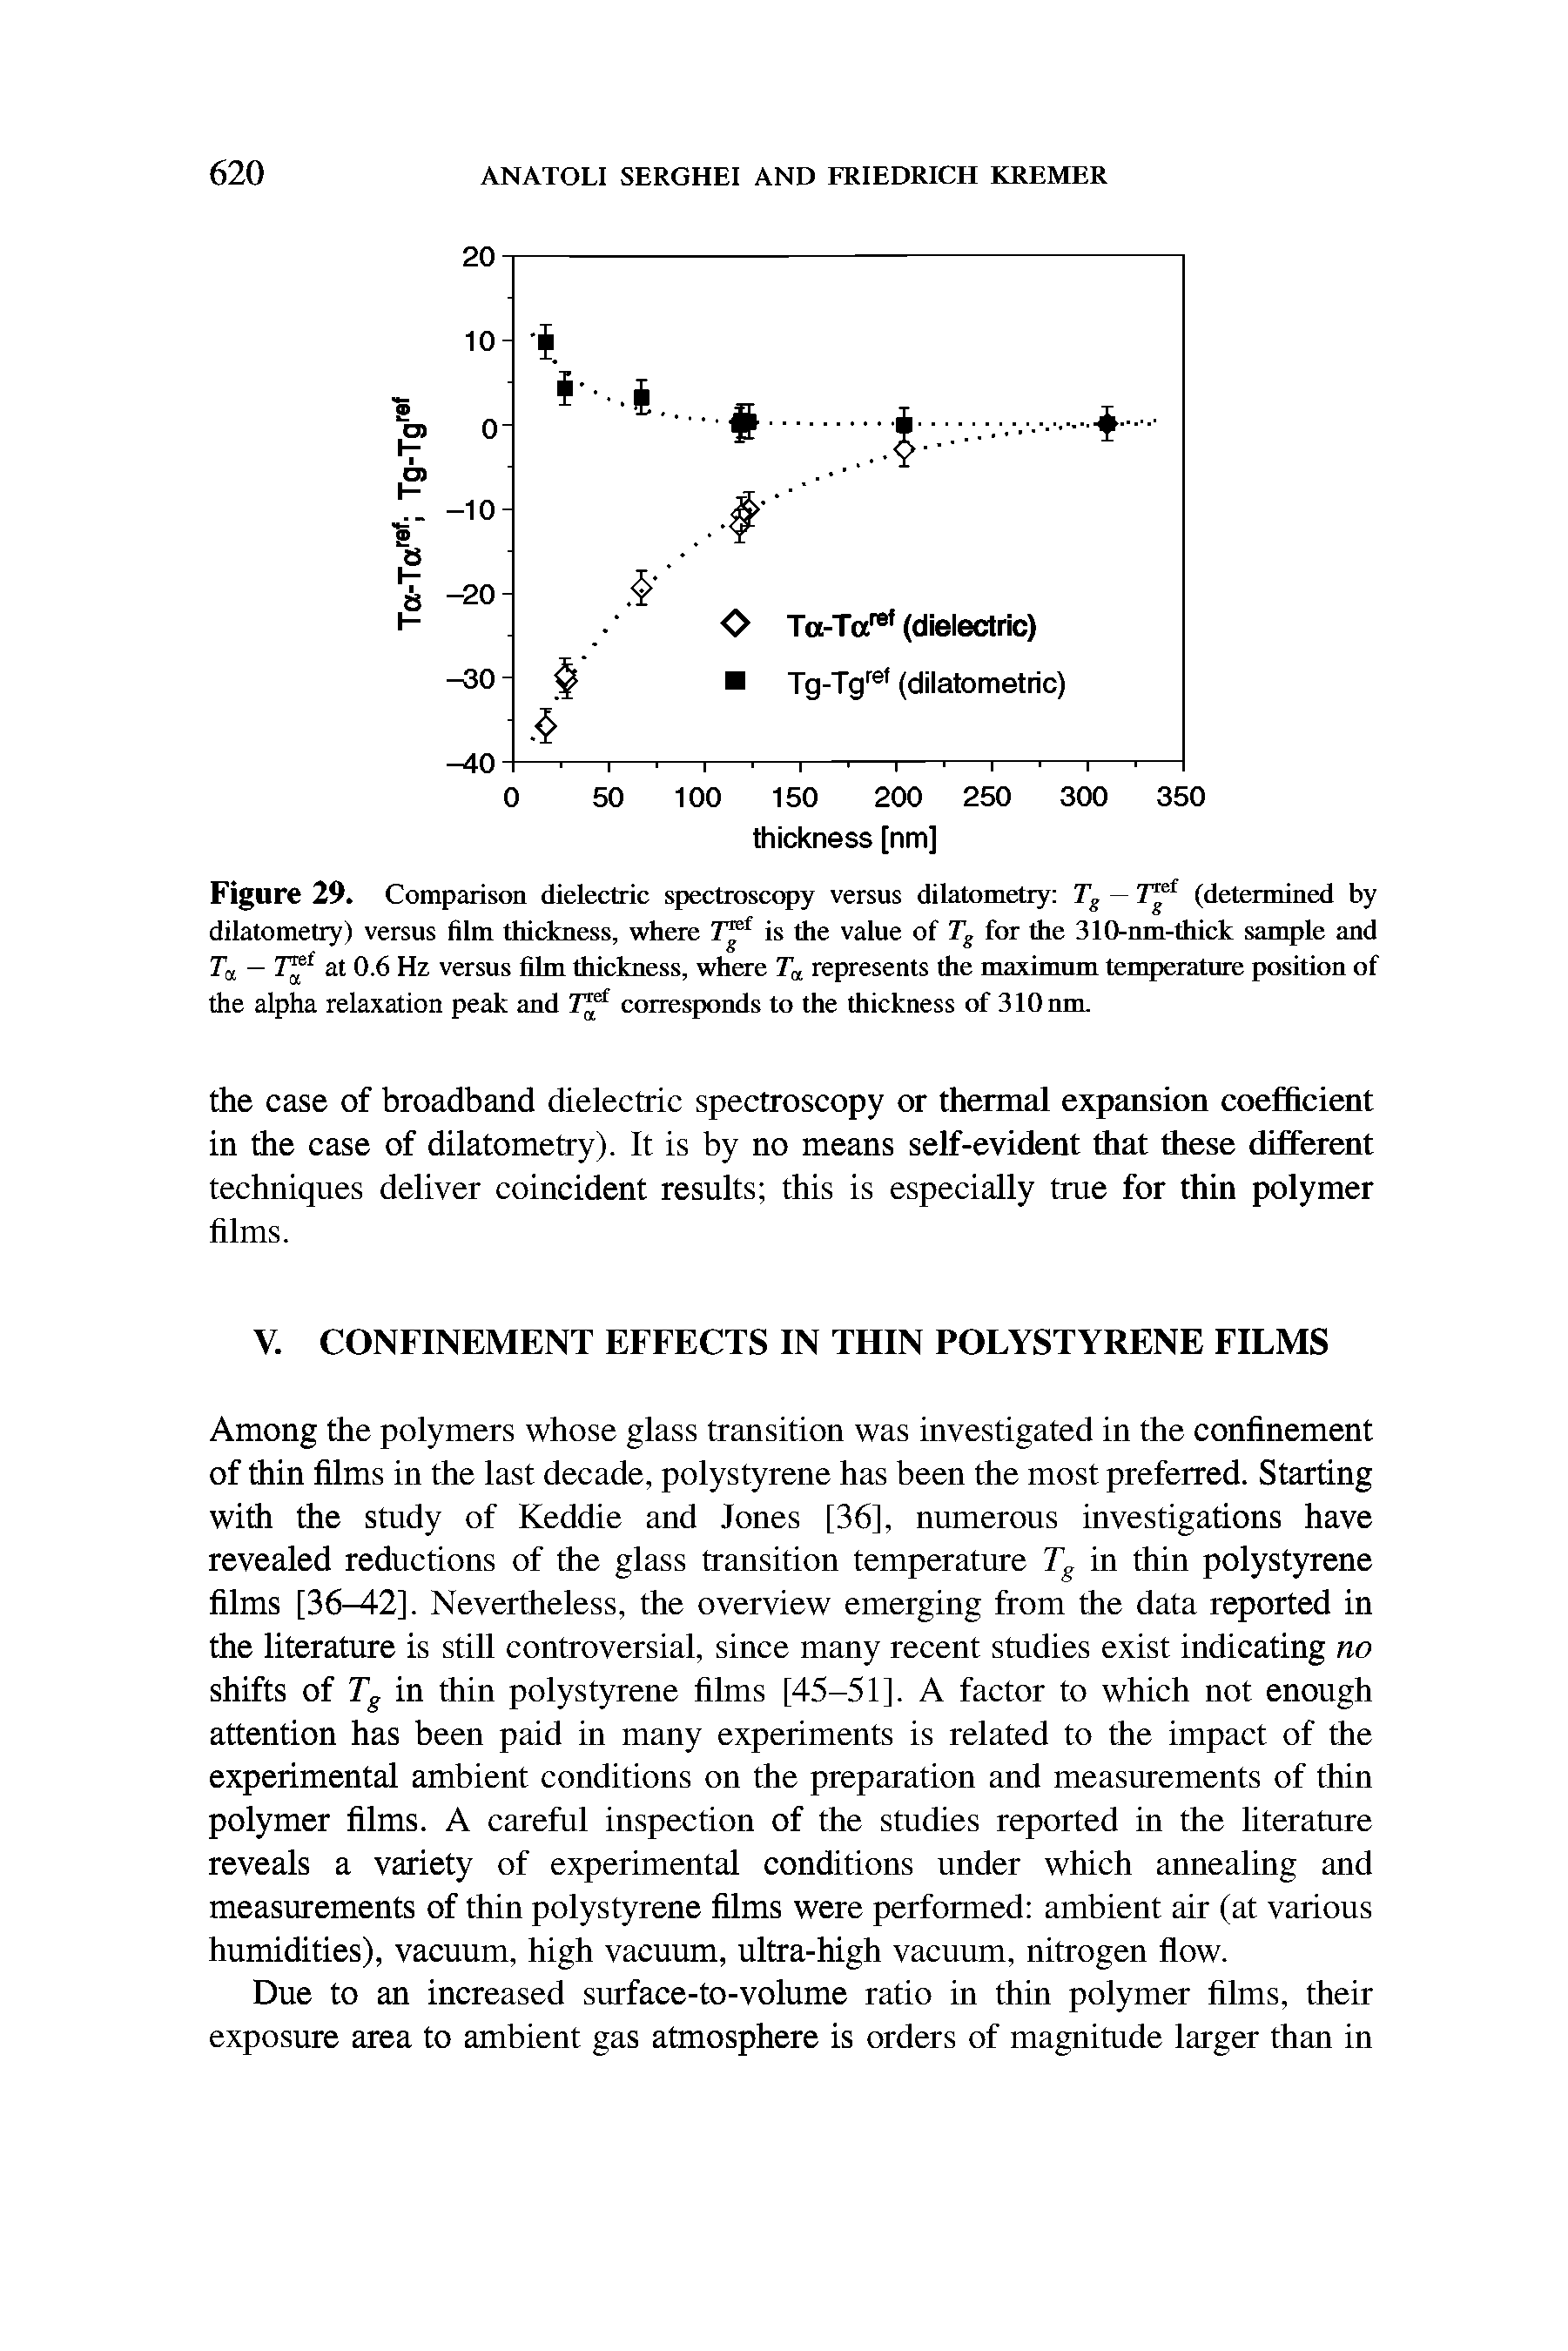 Figure 29. Comparison dielectric spectroscopy versus dilatometry Tg — T" r (determined by dilatometry) versus film thickness, where 7T" f is the value of Ts for the 310-nm-thick sample and T.j — Tlf at 0.6 Hz versus film thickness, where T represents the maximum temperature position of the alpha relaxation peak and 7," i corresponds to the thickness of 310nm.